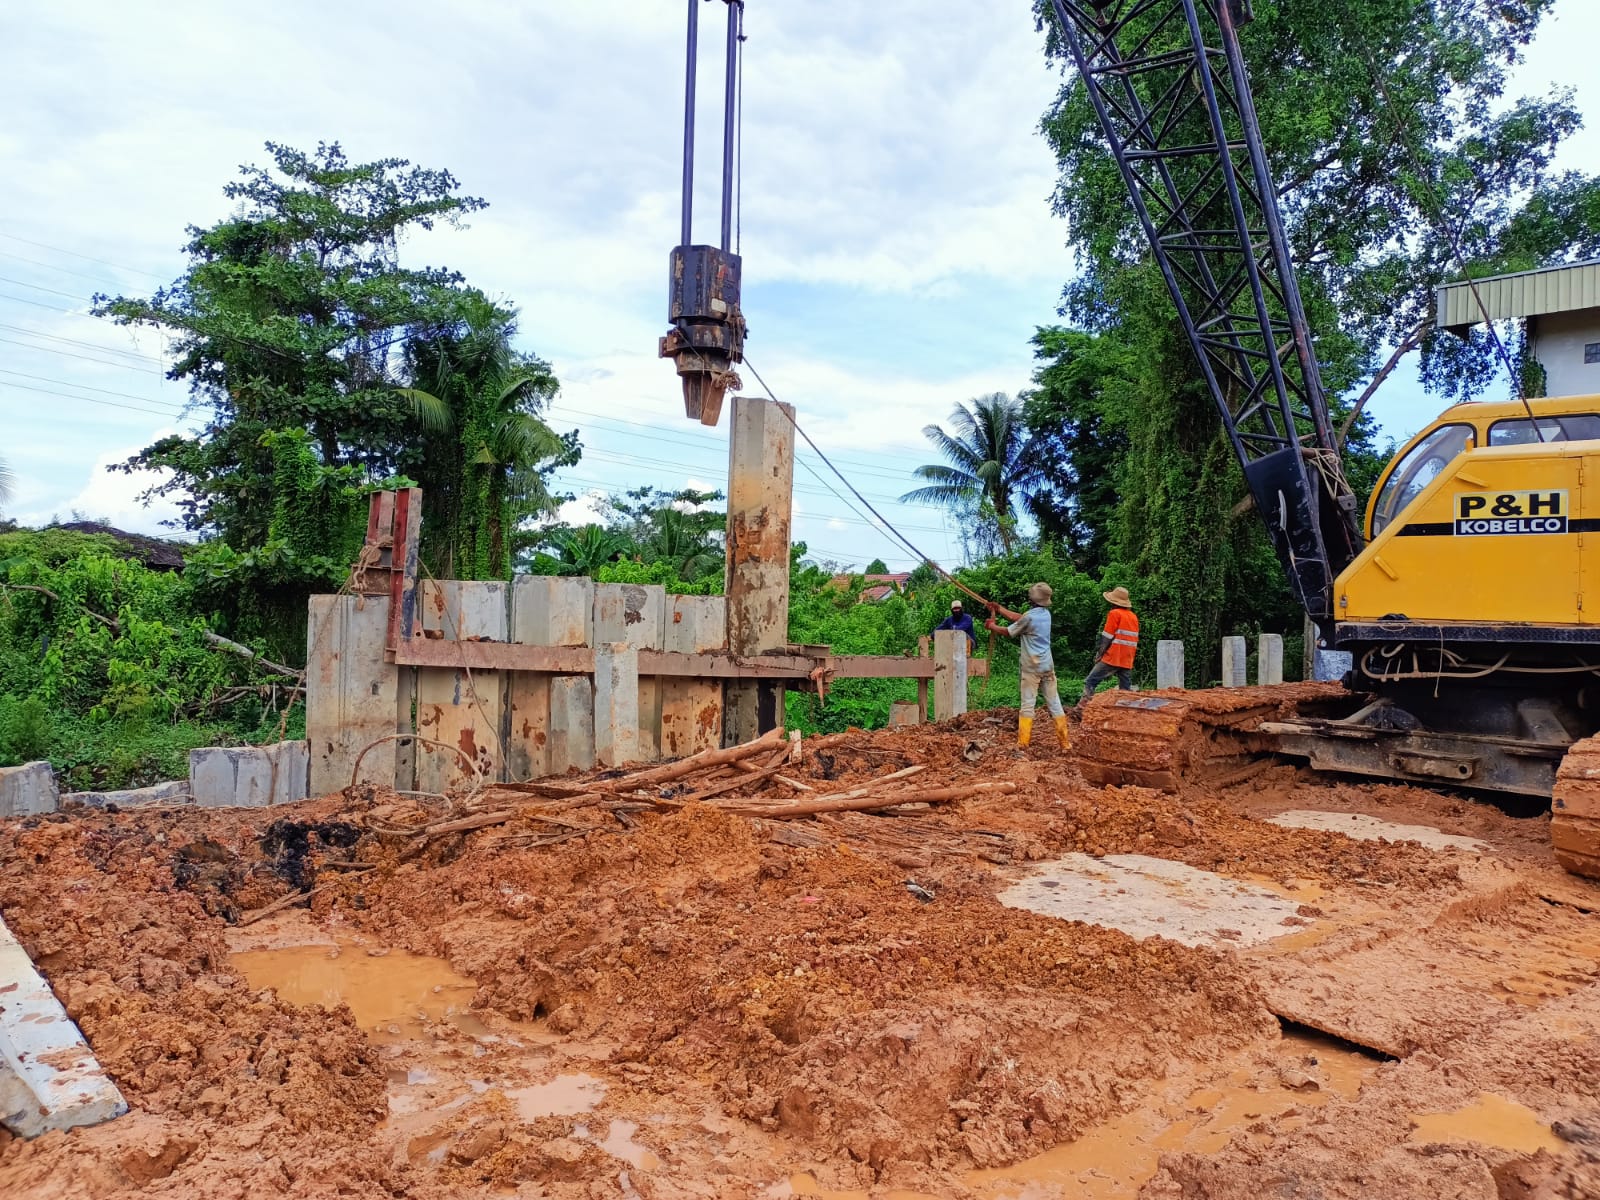 PILING SYSTEM 